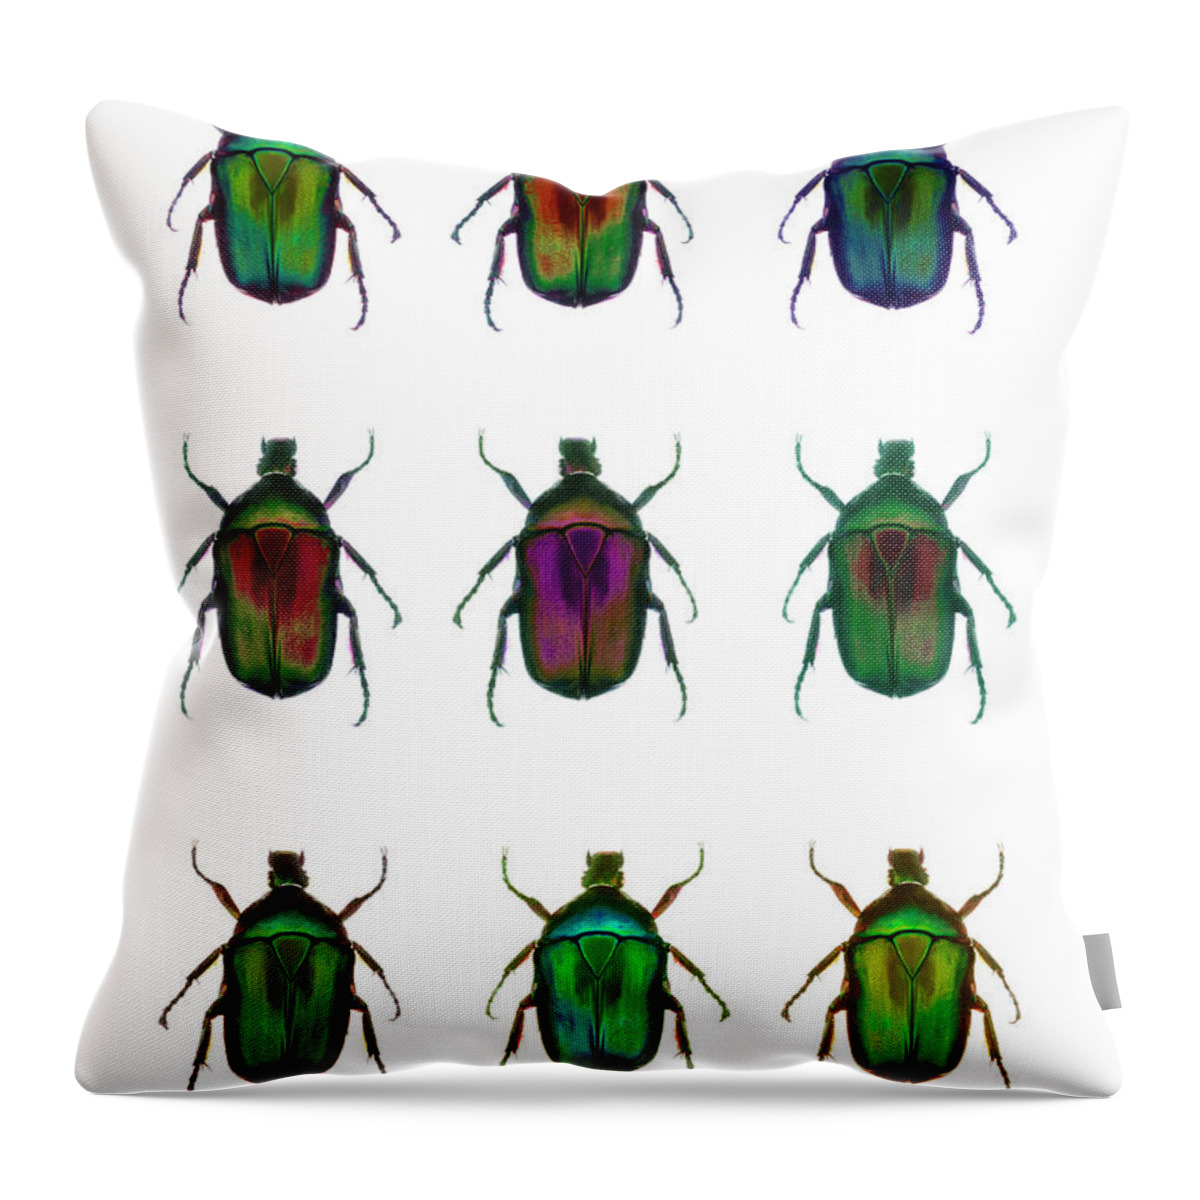 White Background Throw Pillow featuring the photograph Nine Beetles Against A White Background by Richard Boll